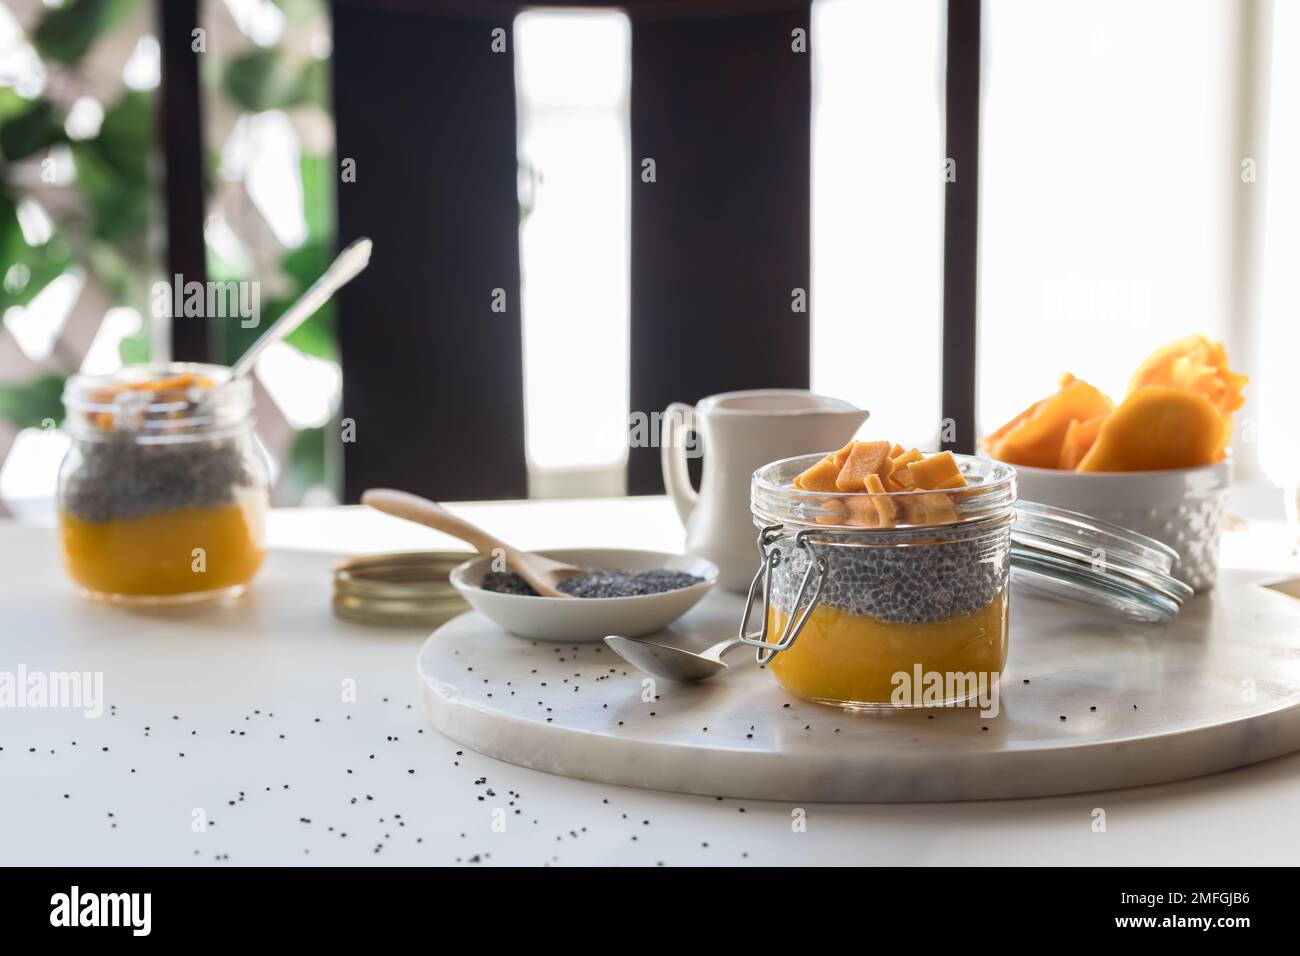 Homemade chia pudding snacks on a table with light streaming in from behind. Stock Photo